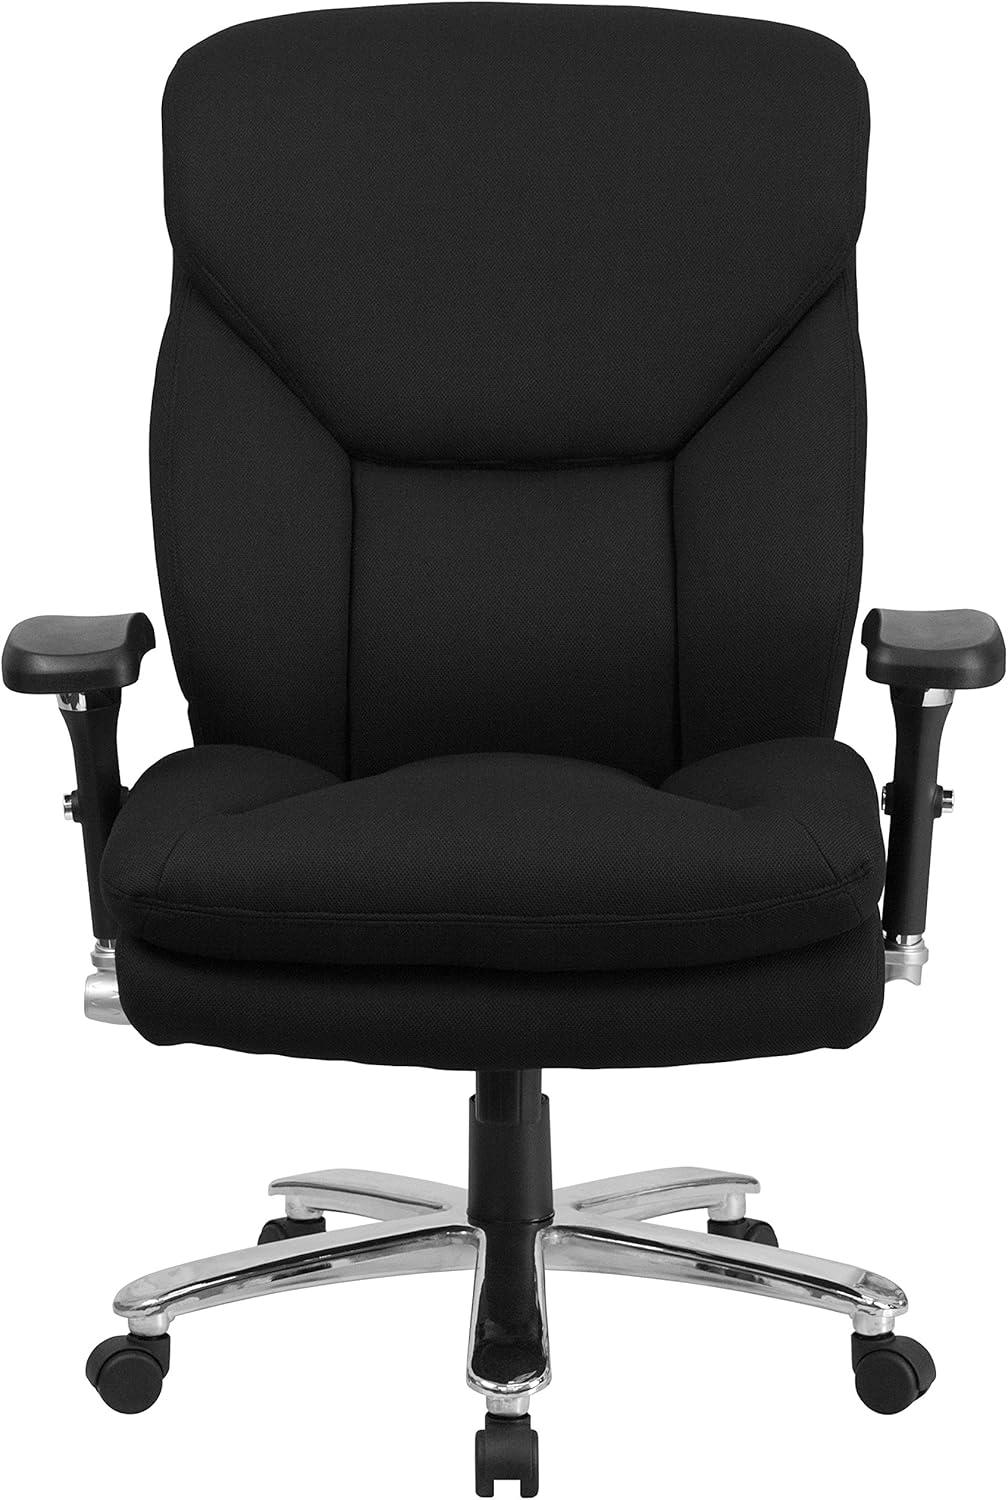 Ergonomic High Back Black Fabric Executive Swivel Office Chair with Lumbar Support